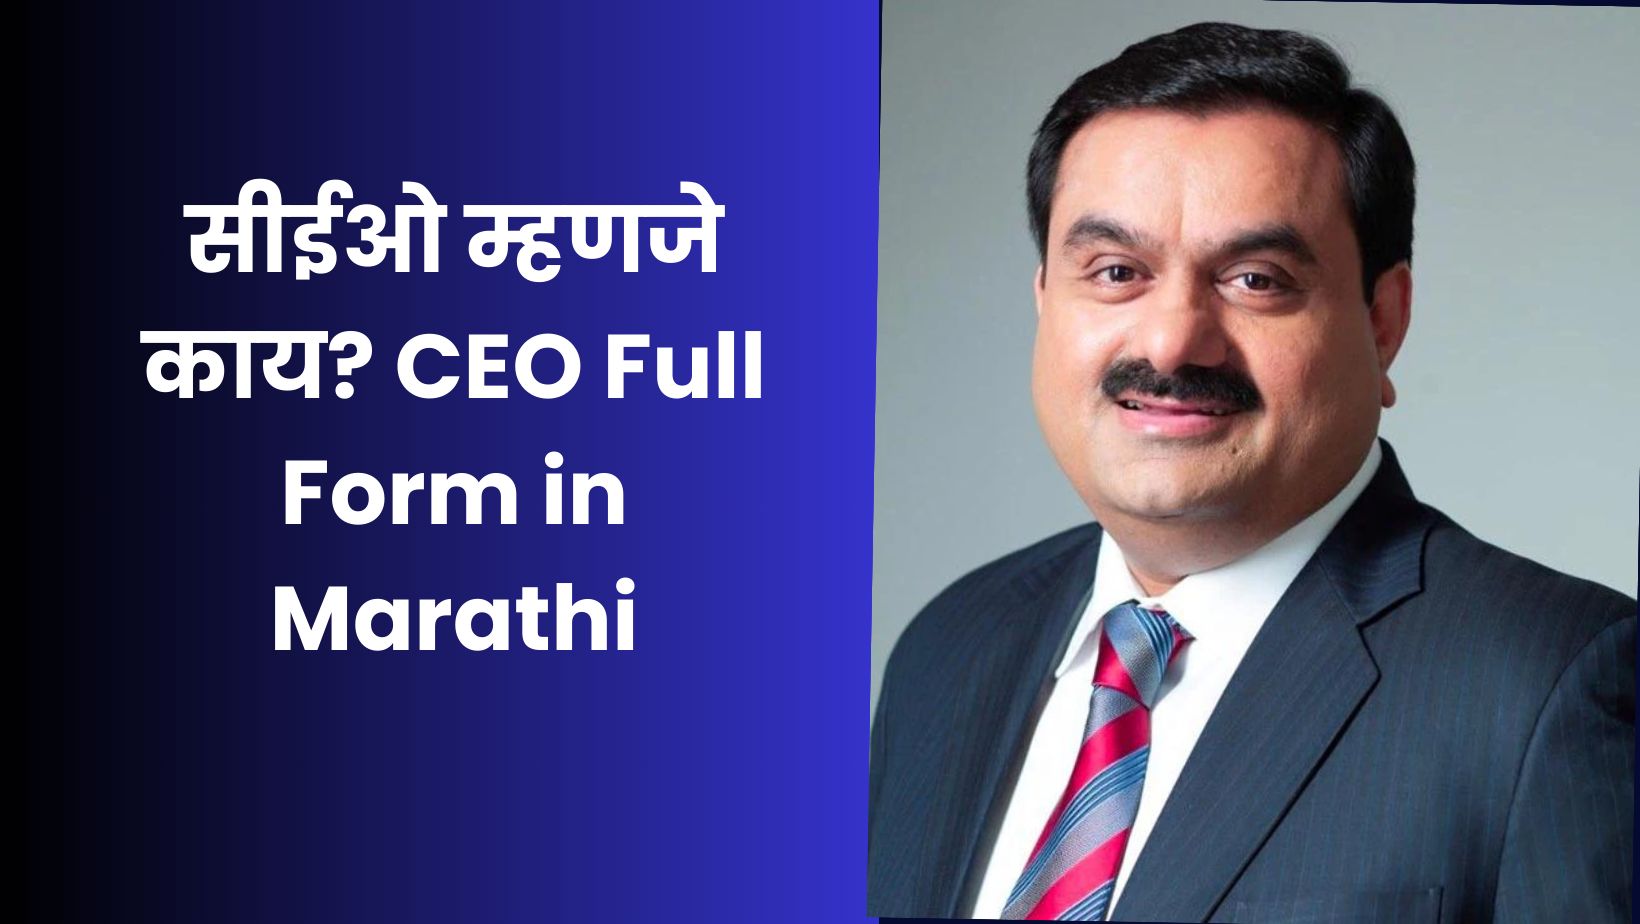 You are currently viewing सीईओ म्हणजे काय? CEO Full Form in Marathi